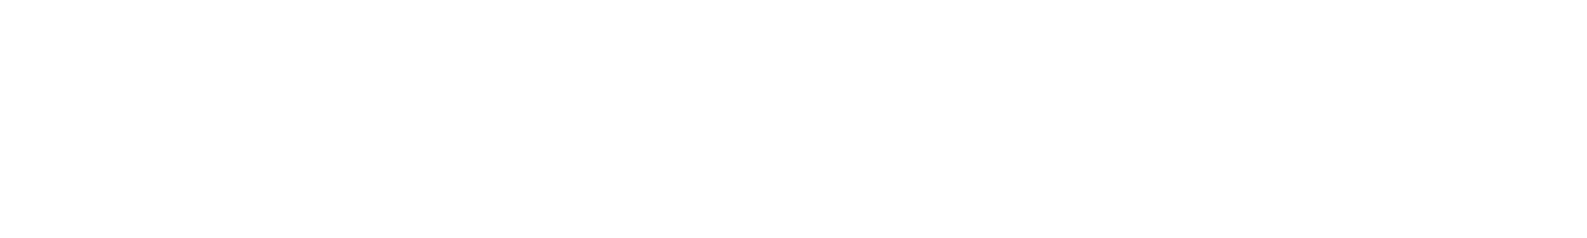 Stagwell logo large for dark backgrounds (transparent PNG)